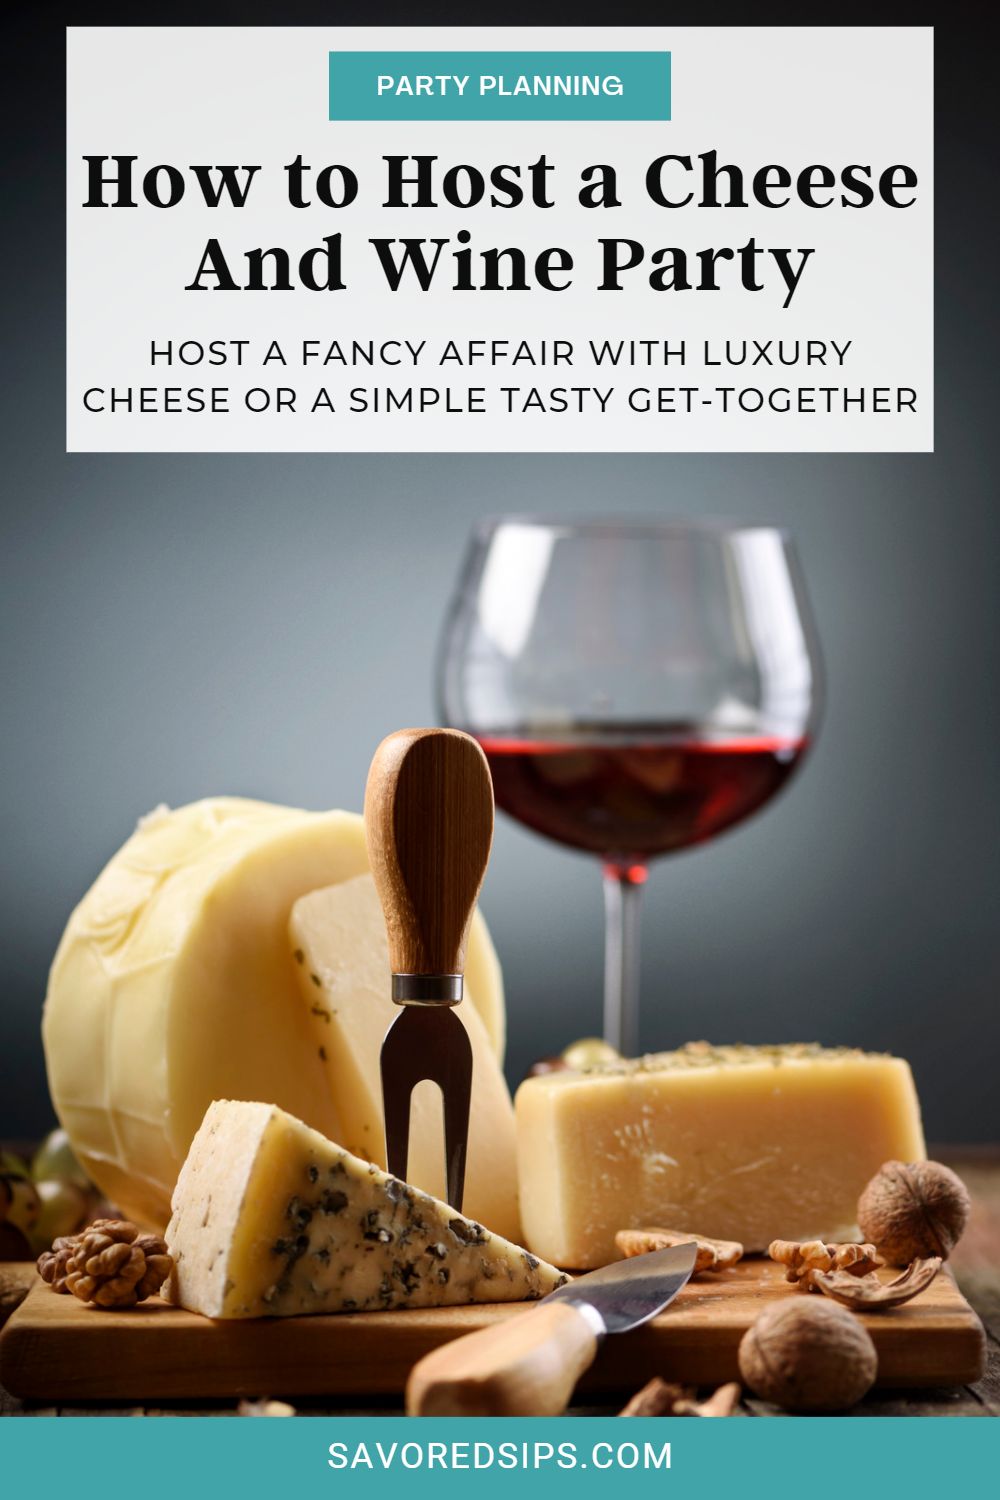 How to Host a Cheese & Wine Party